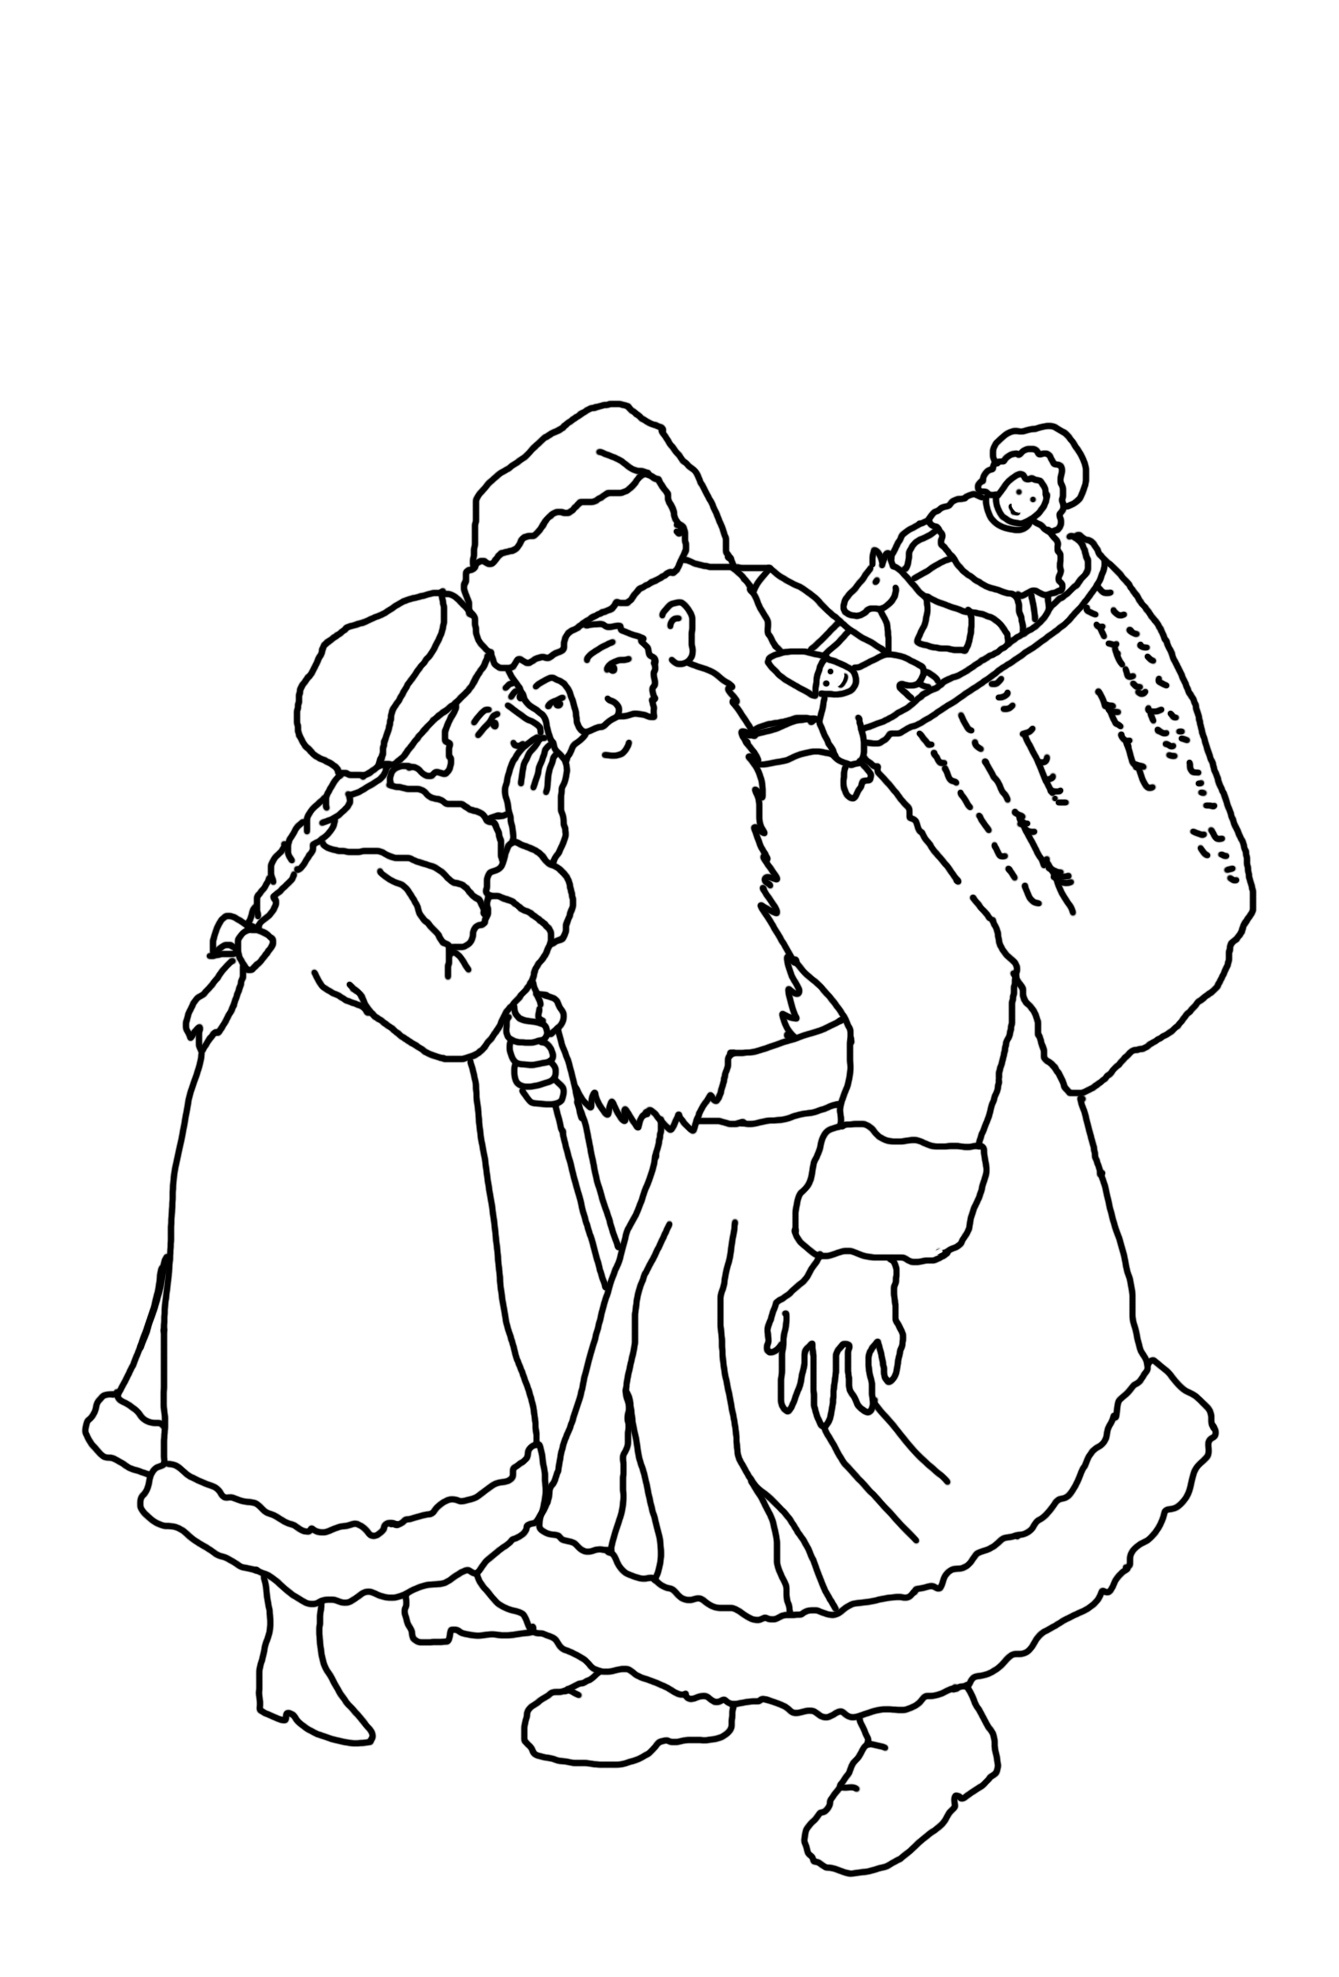 Coloring Ideas : Christmas Story Coloring Book Johanna Basford - Free Printable Christmas Story Coloring Pages